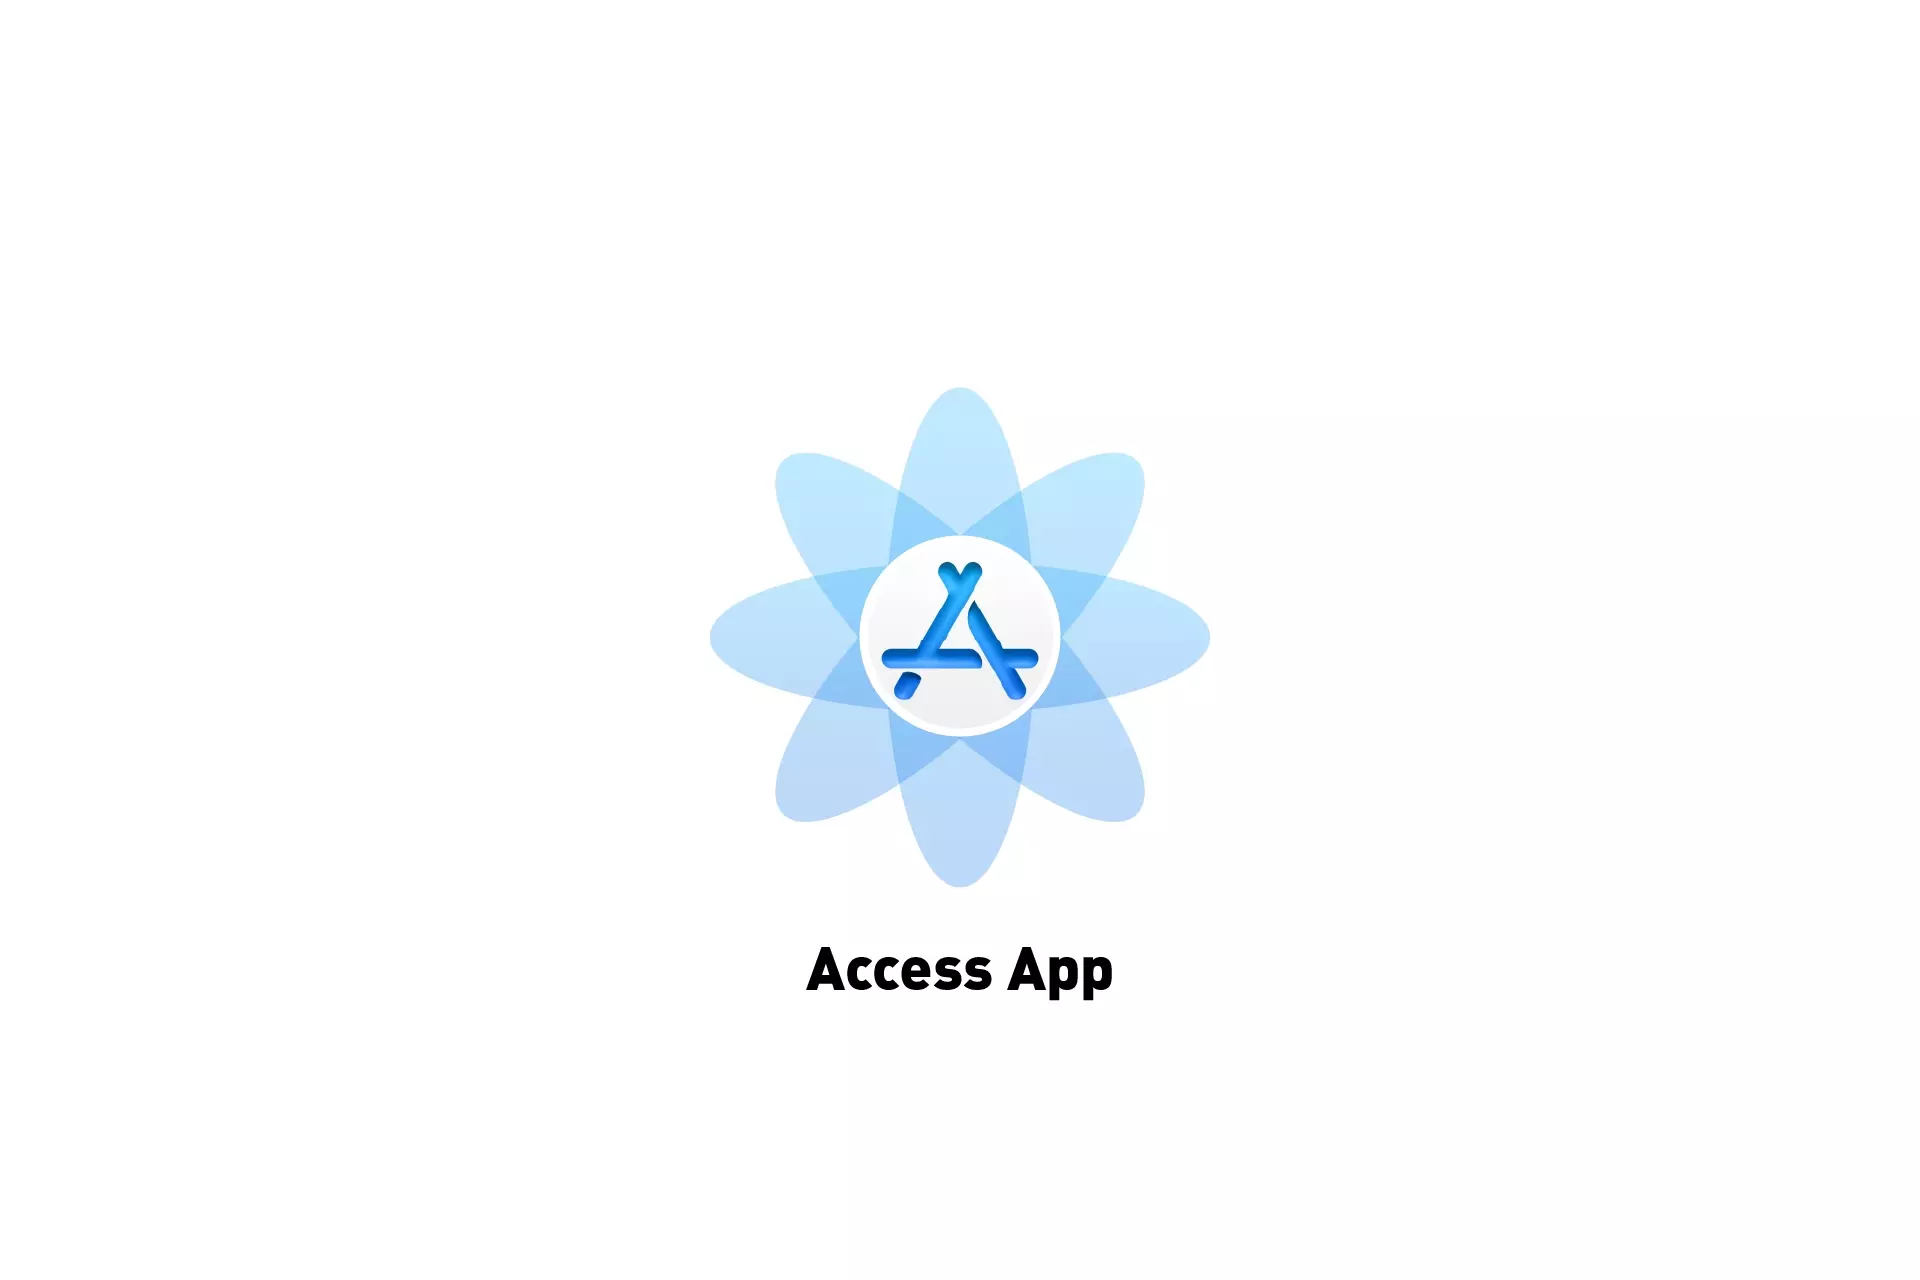 A flower that represents App Store Connect with the text "Access App" beneath it.